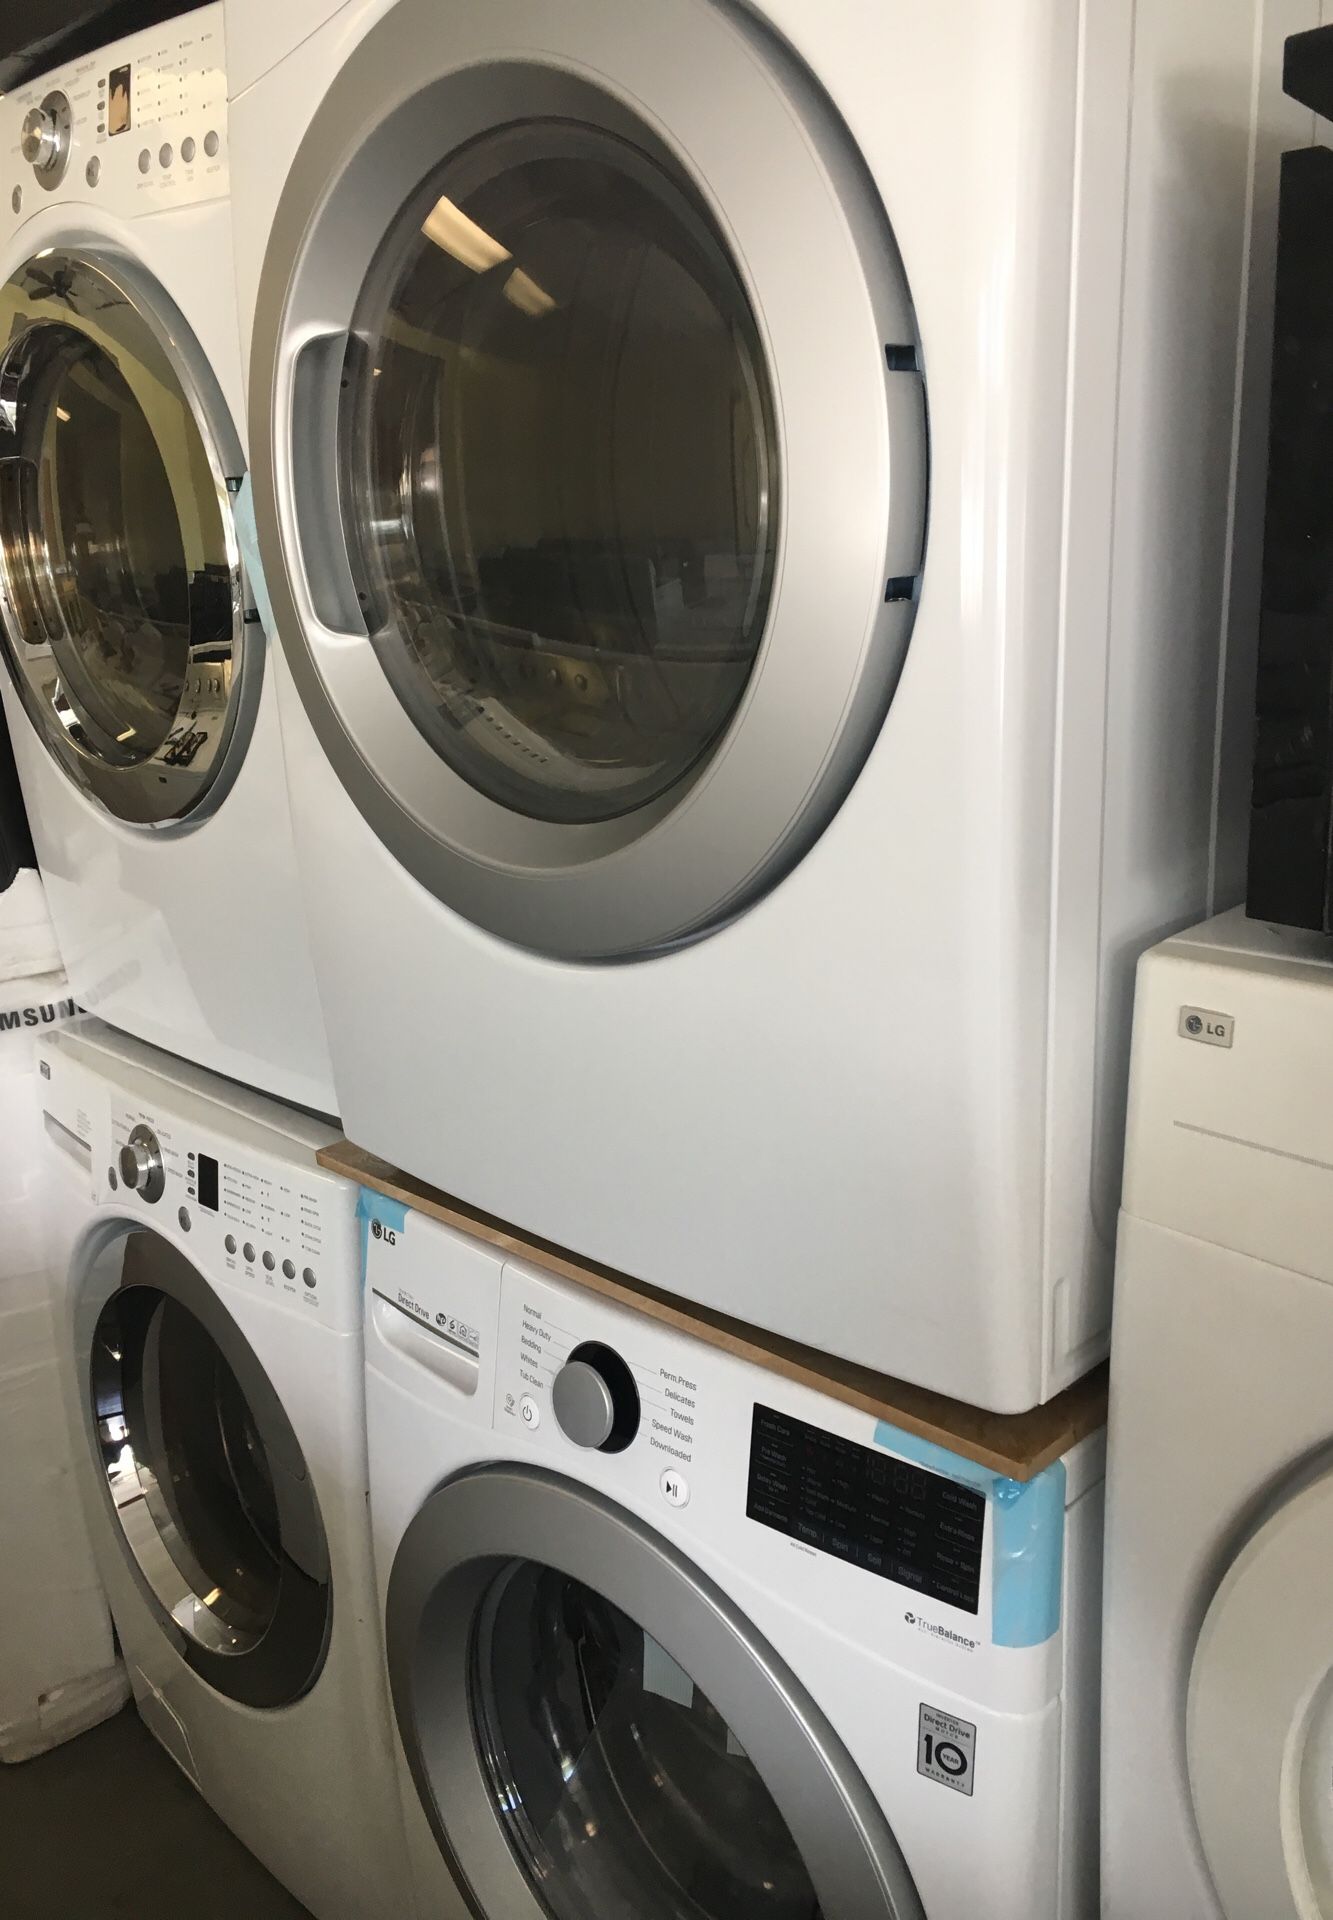 BRAND NEW LG WASHER AND DRYER